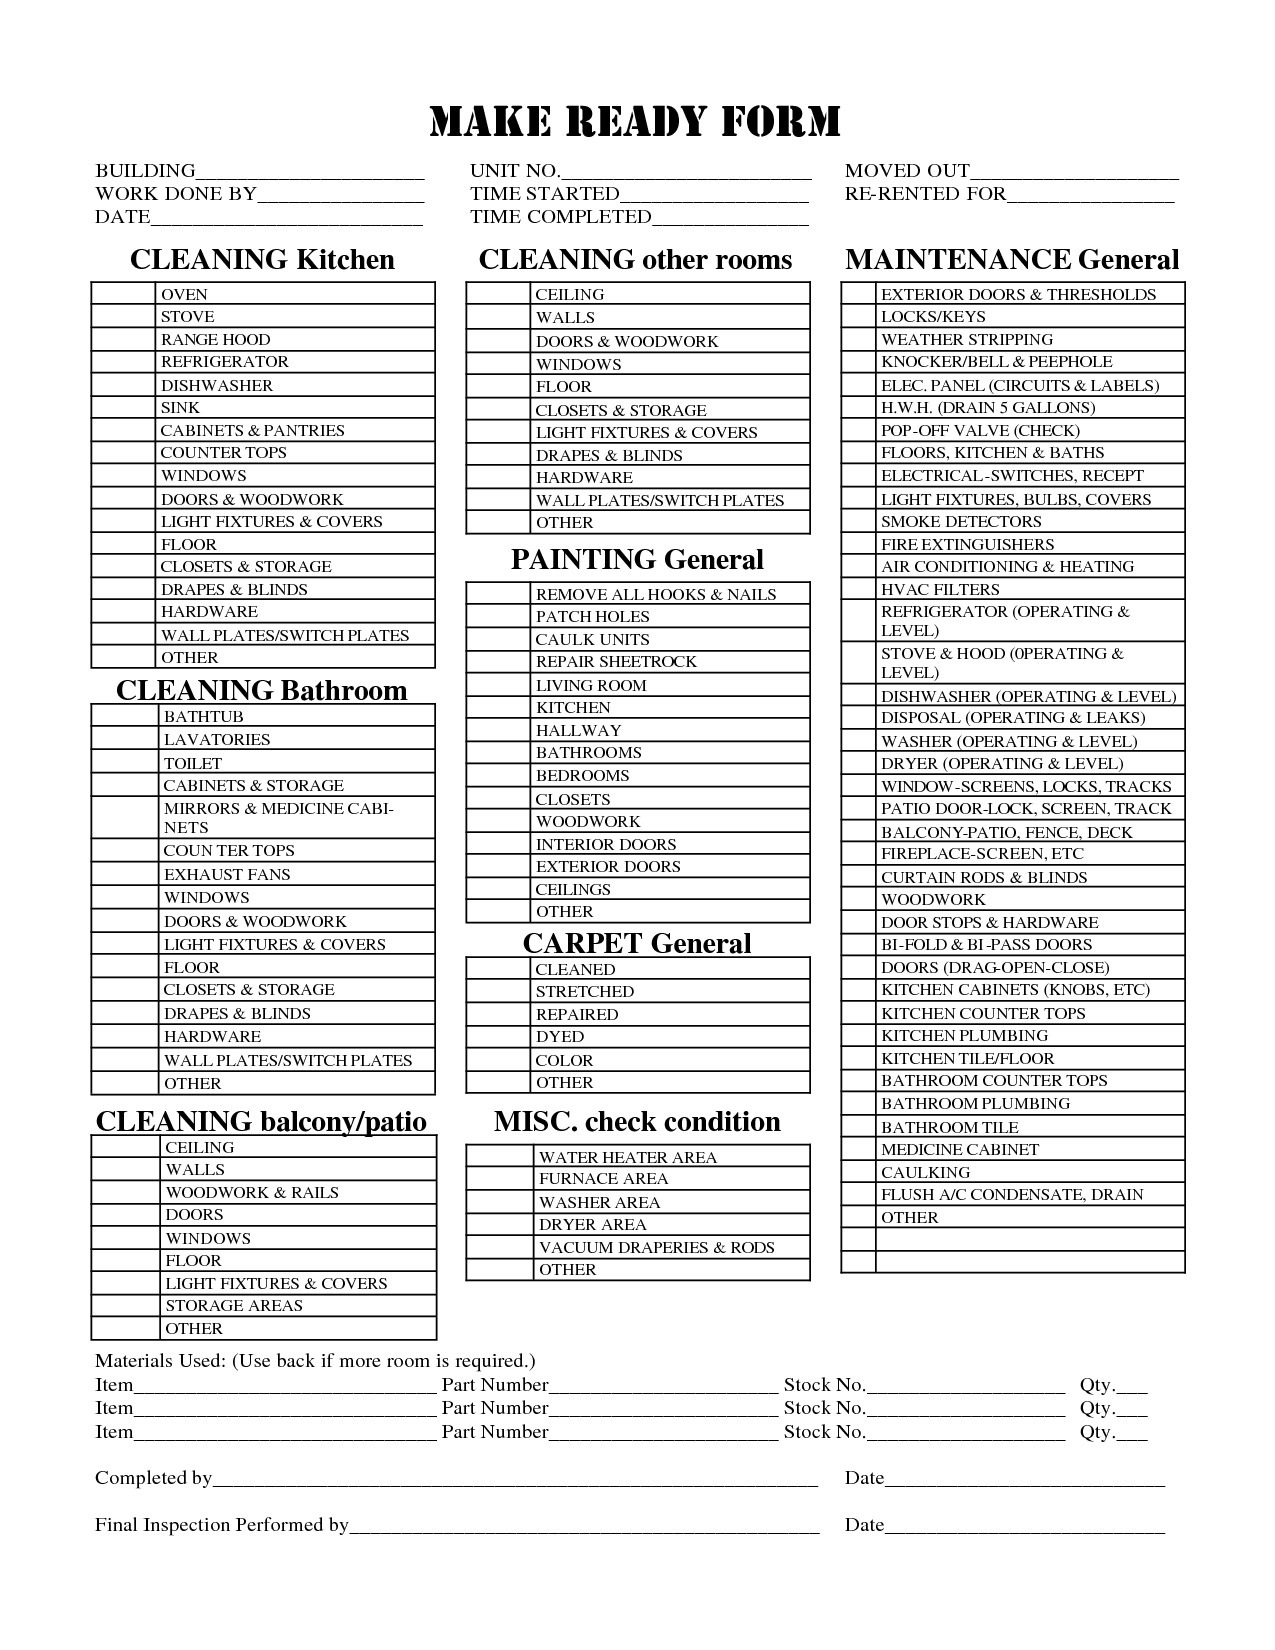 Apartment Punch List Template Check List for Apartment Make Ready Google Search